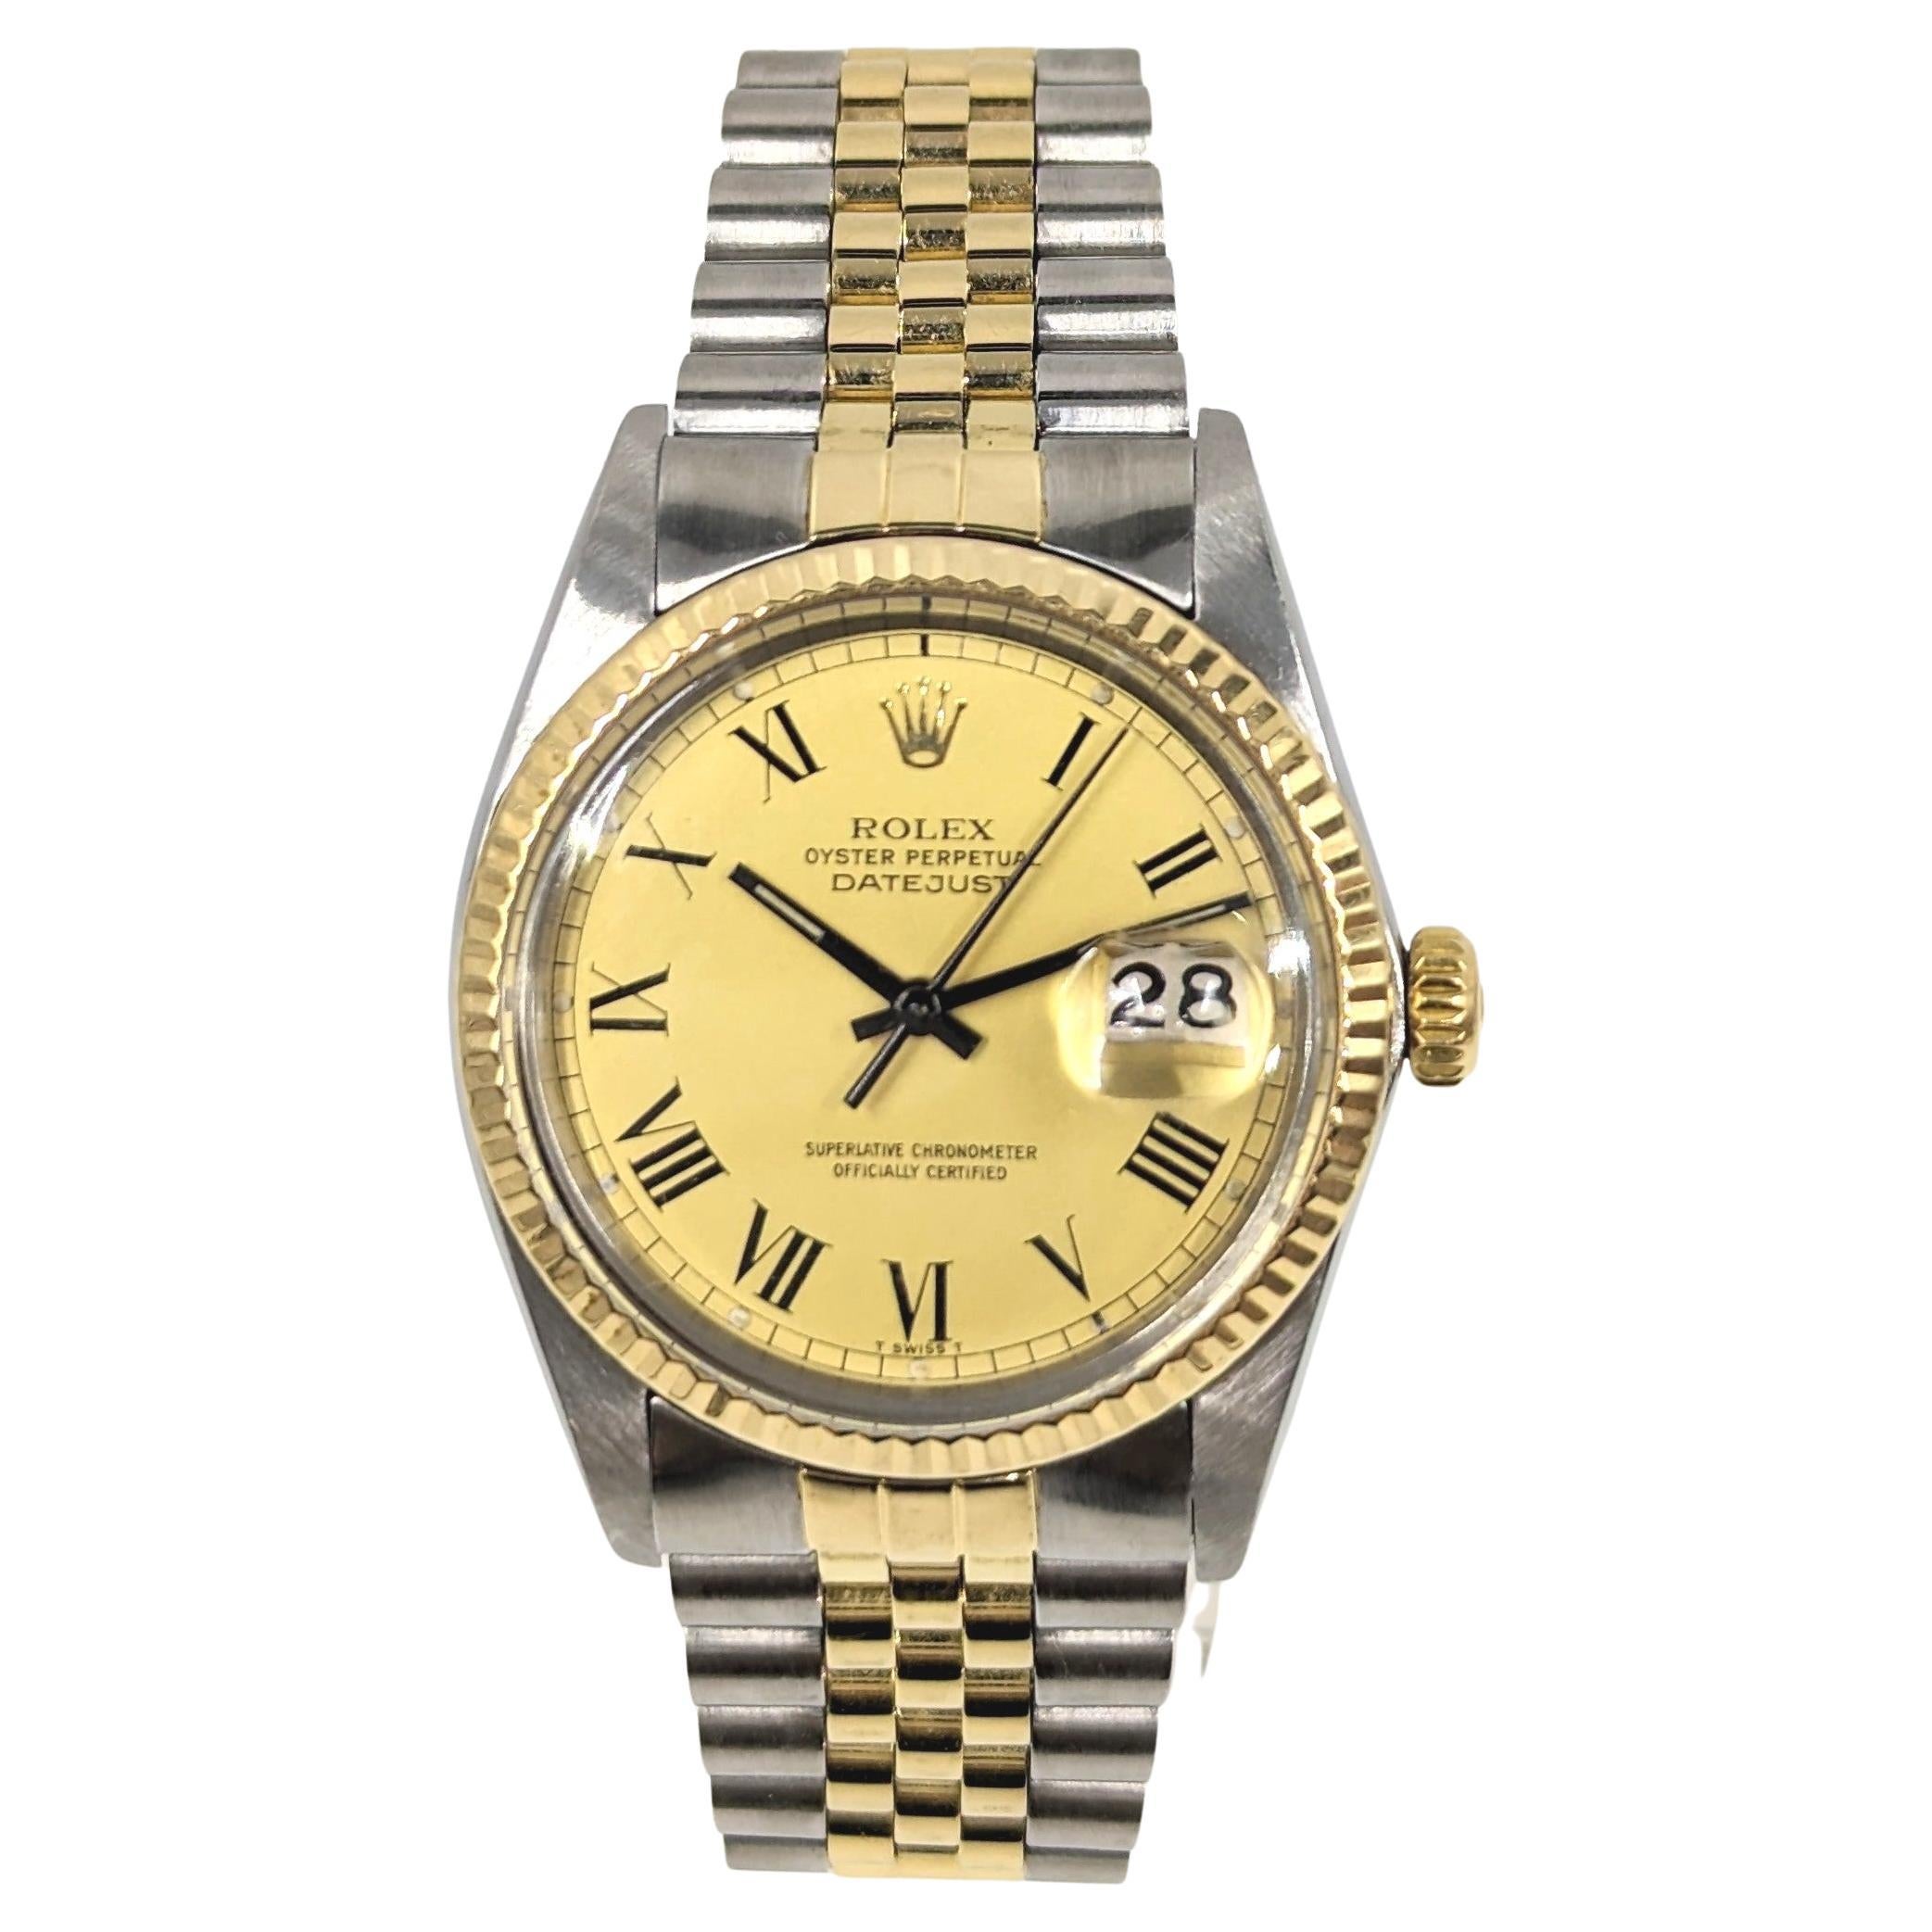 Rolex Oyster Perpetual Datejust 18k/SS YG 2tone Watch Collectible Buckley 16013 en vente